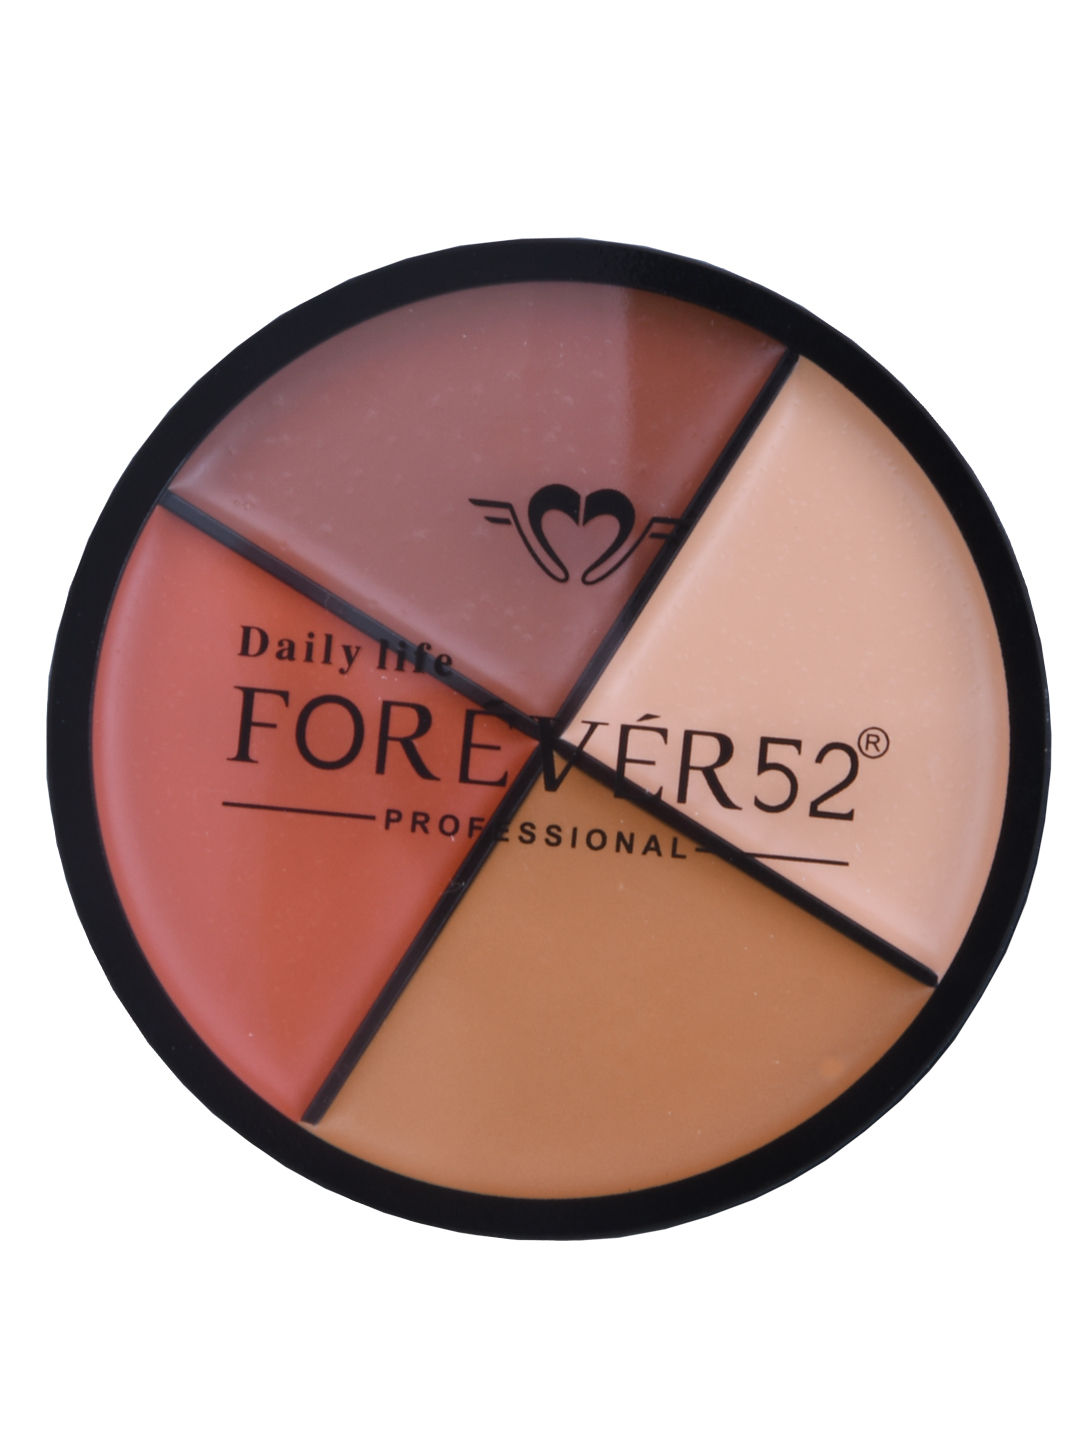 Buy Daily Life Forever52 4 Color Concealer AC003 (12gm) - Purplle